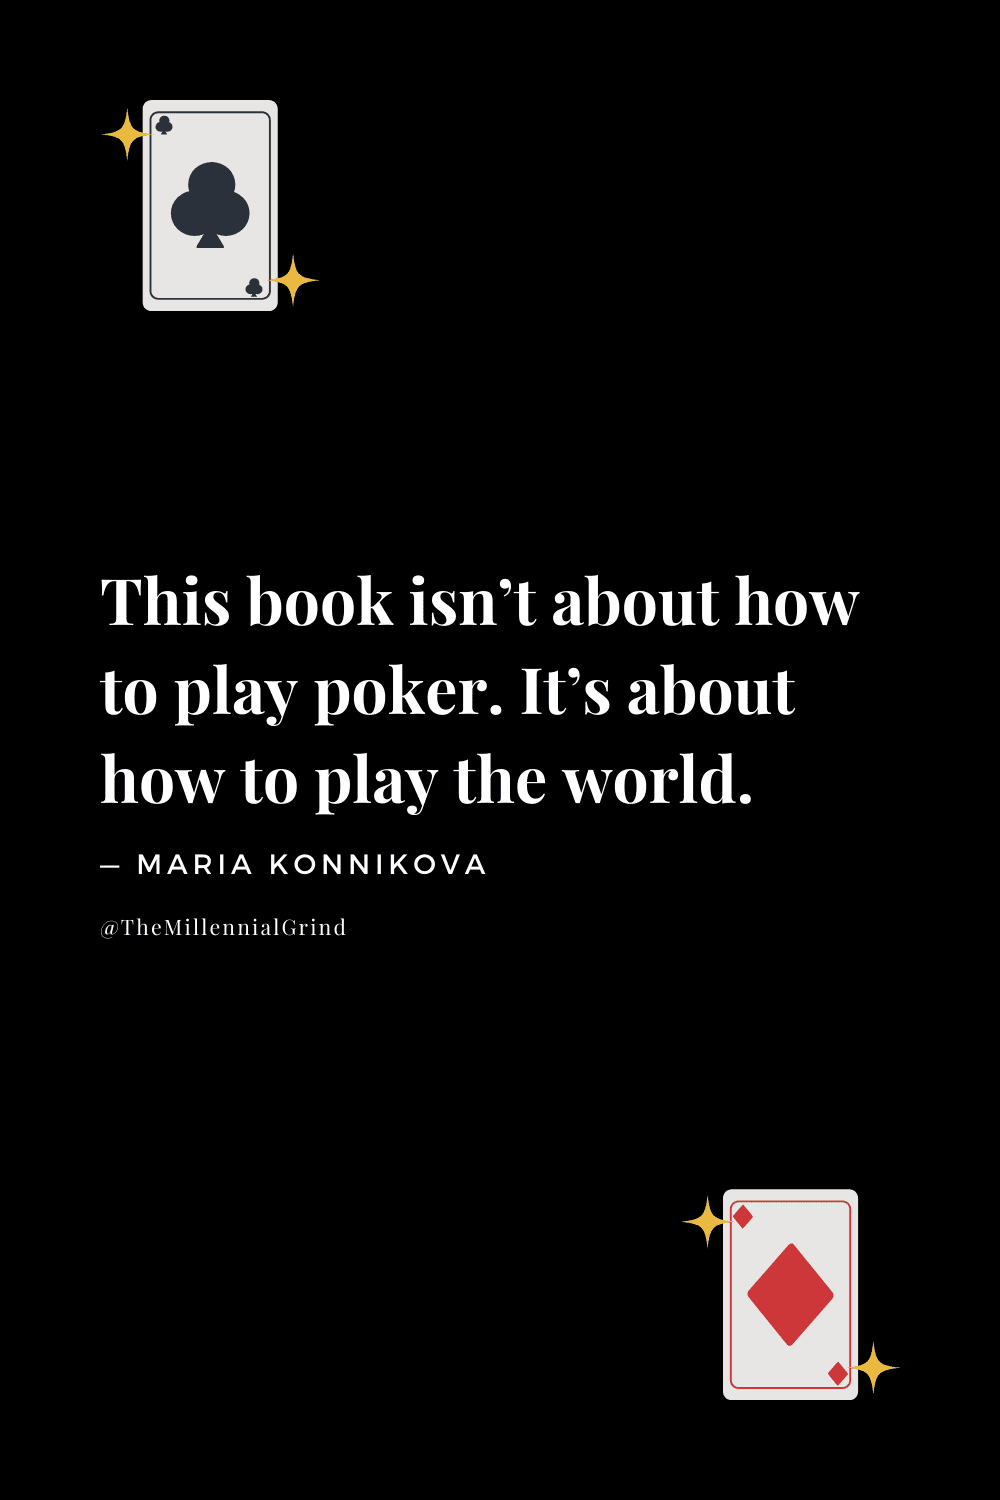 Quotes From The Biggest Bluff by Maria Konnikova